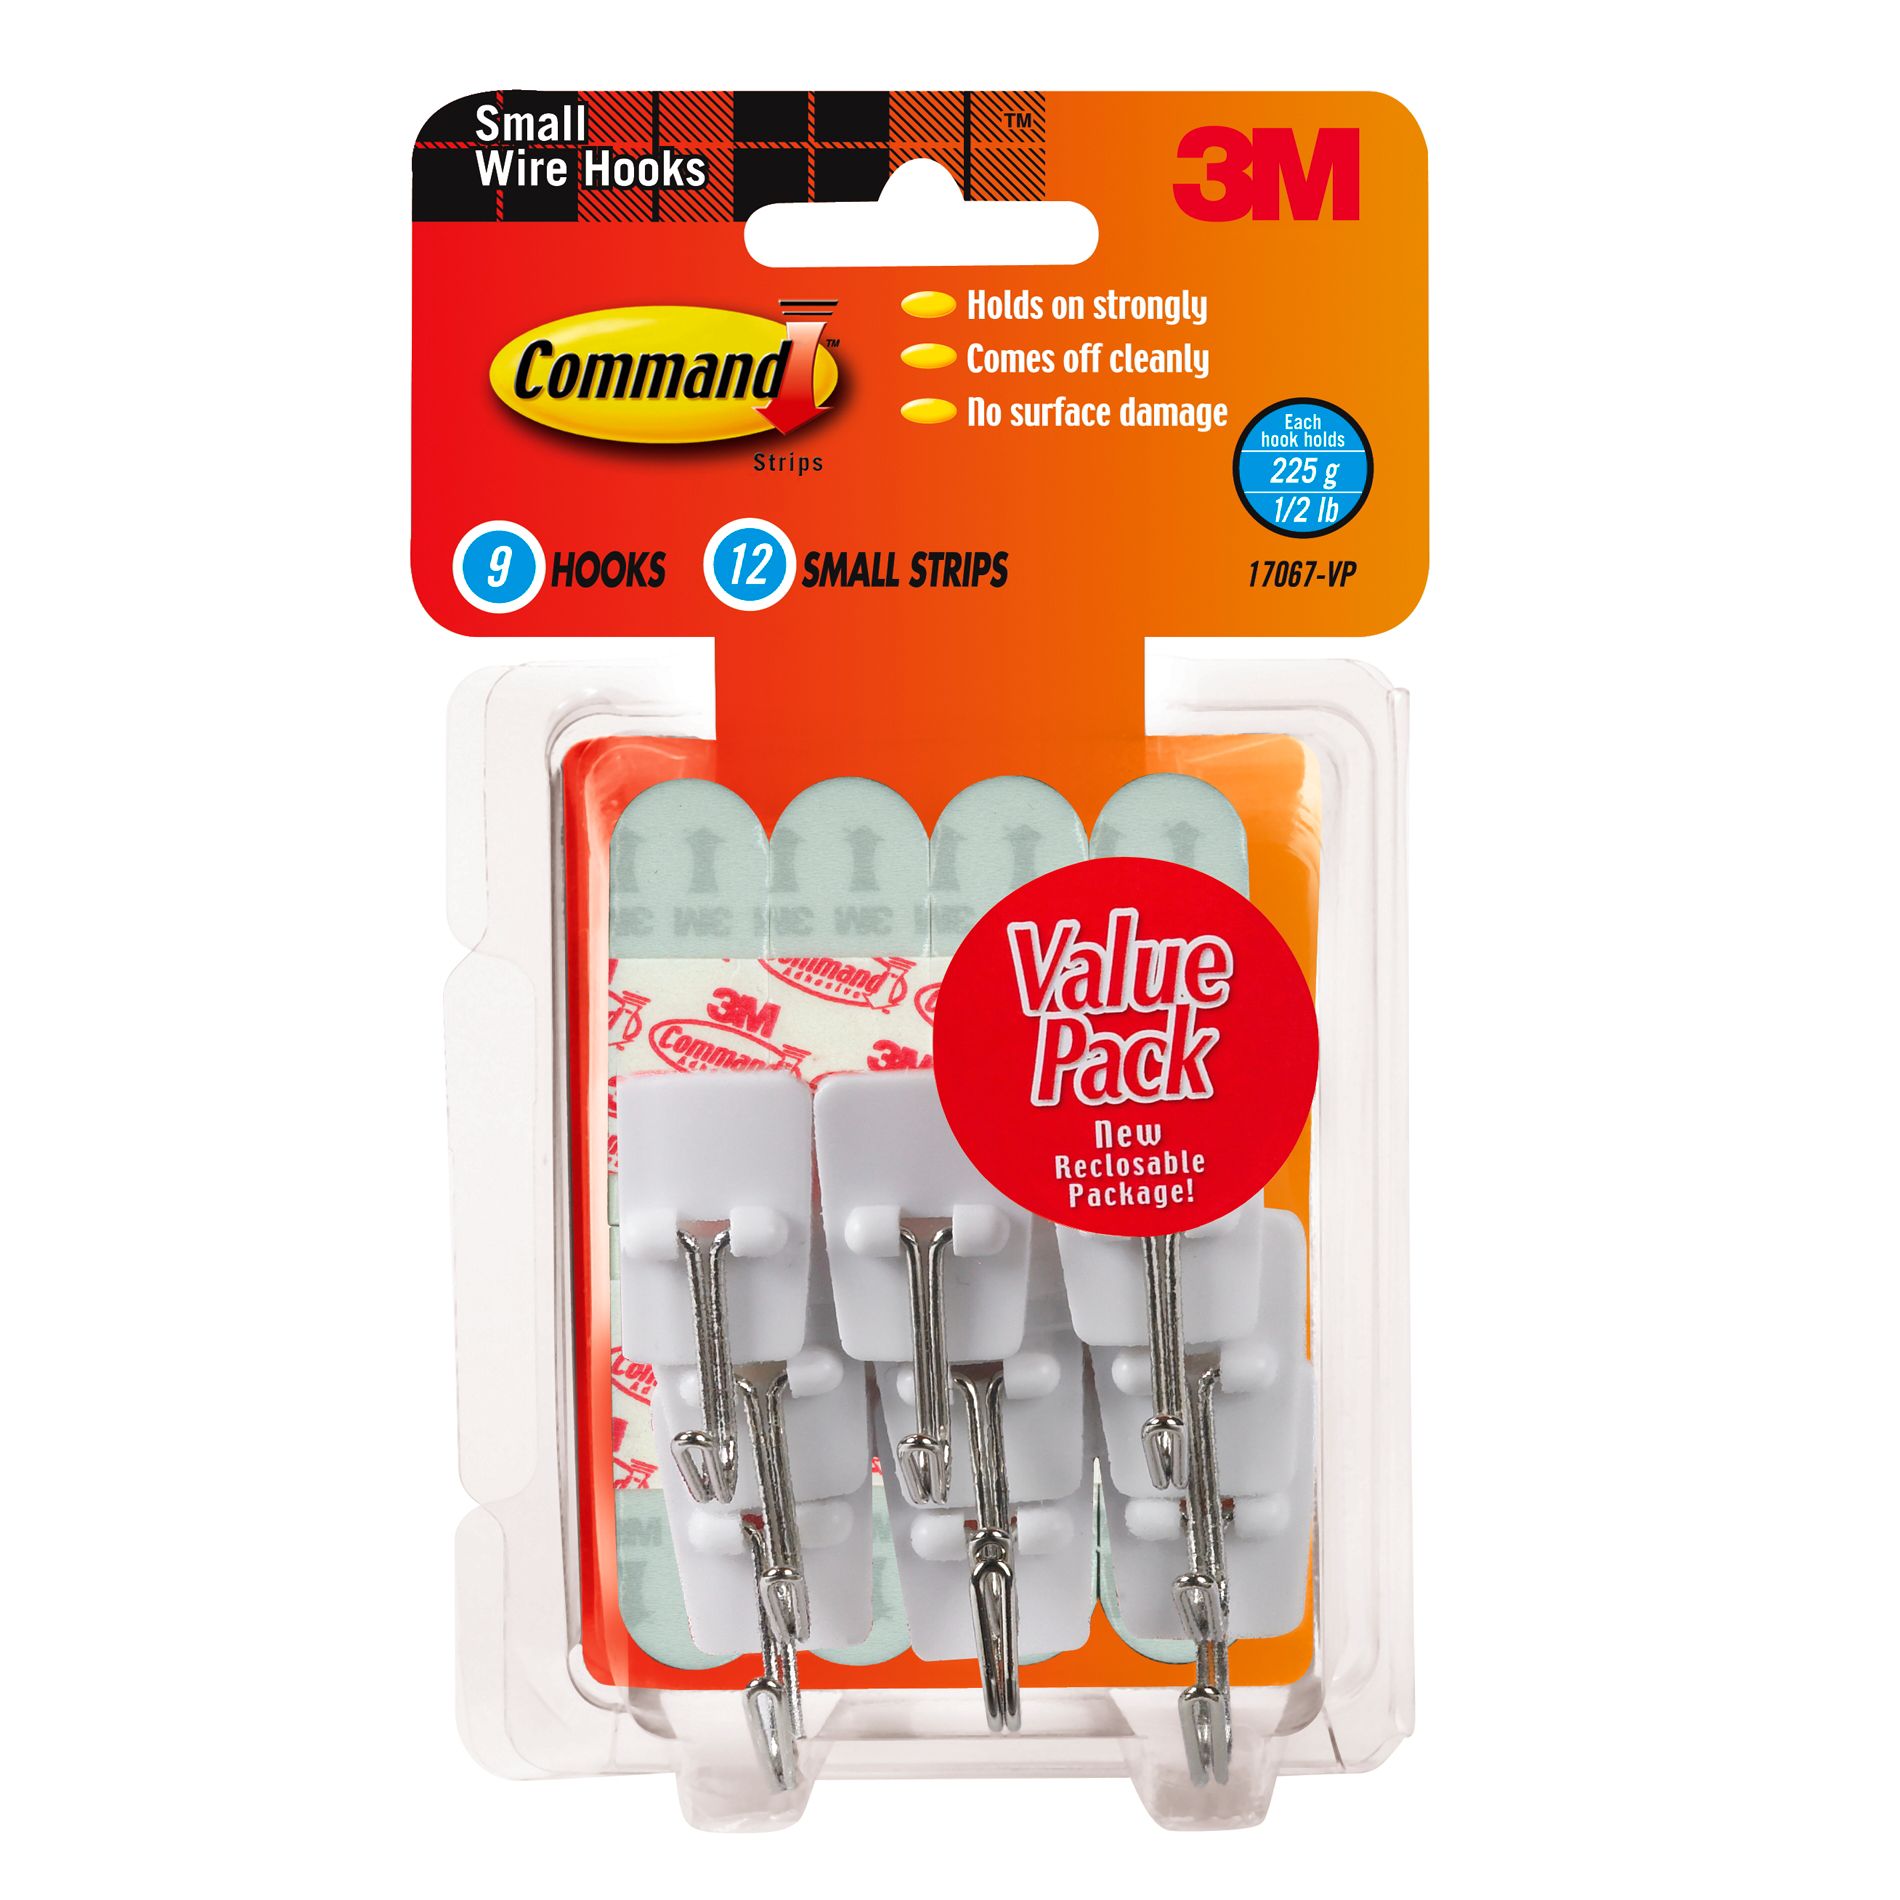 Command Small Wire Hooks Value Pack White Small 9 hooks, 12 strips